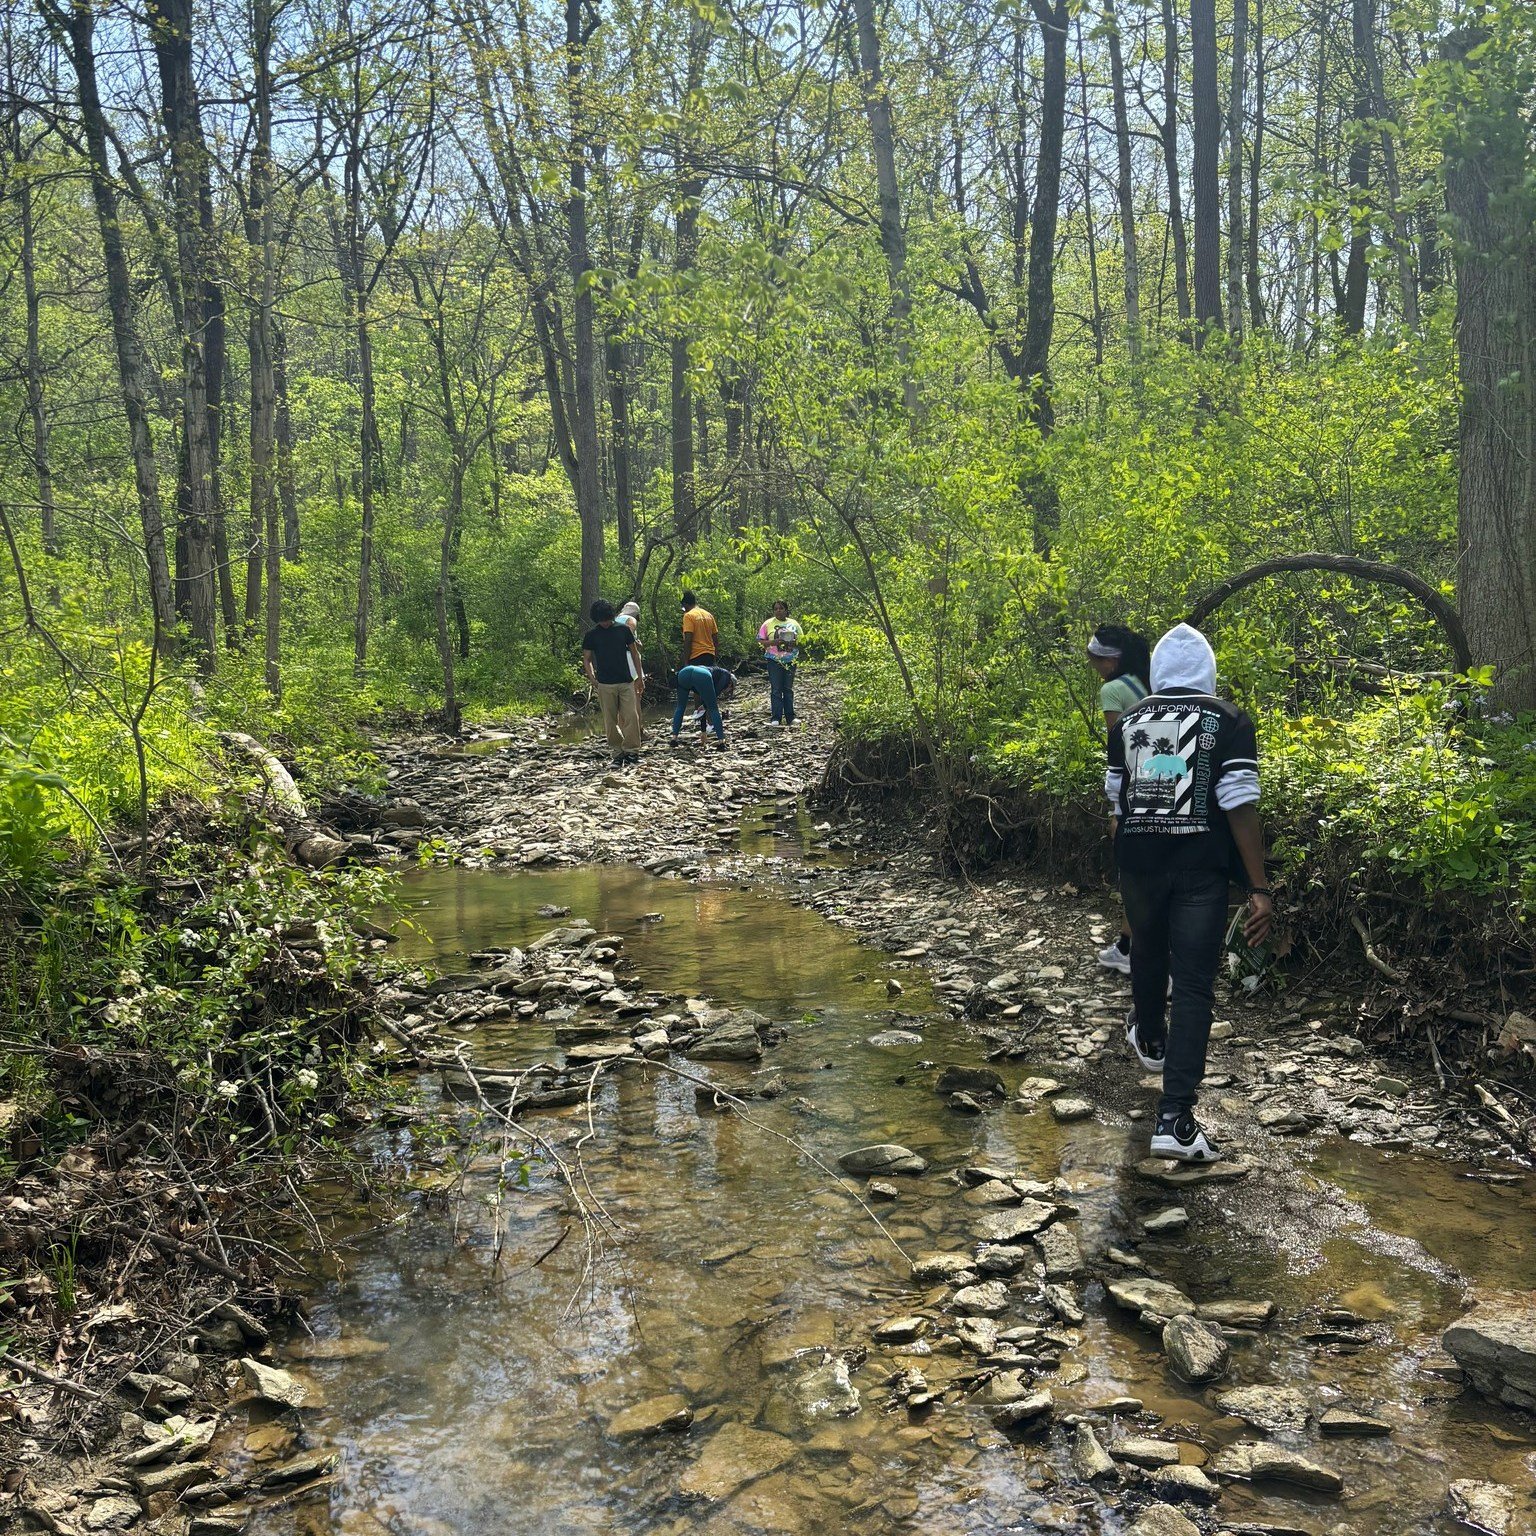 A wrap on park day adventures.
🌳🎣
Saturday was our final park day adventure at Miami Whitewater Forest. During these April adventures, teens had the chance to choose from activities such as fishing; hiking and exploring nature; field games; tacklin